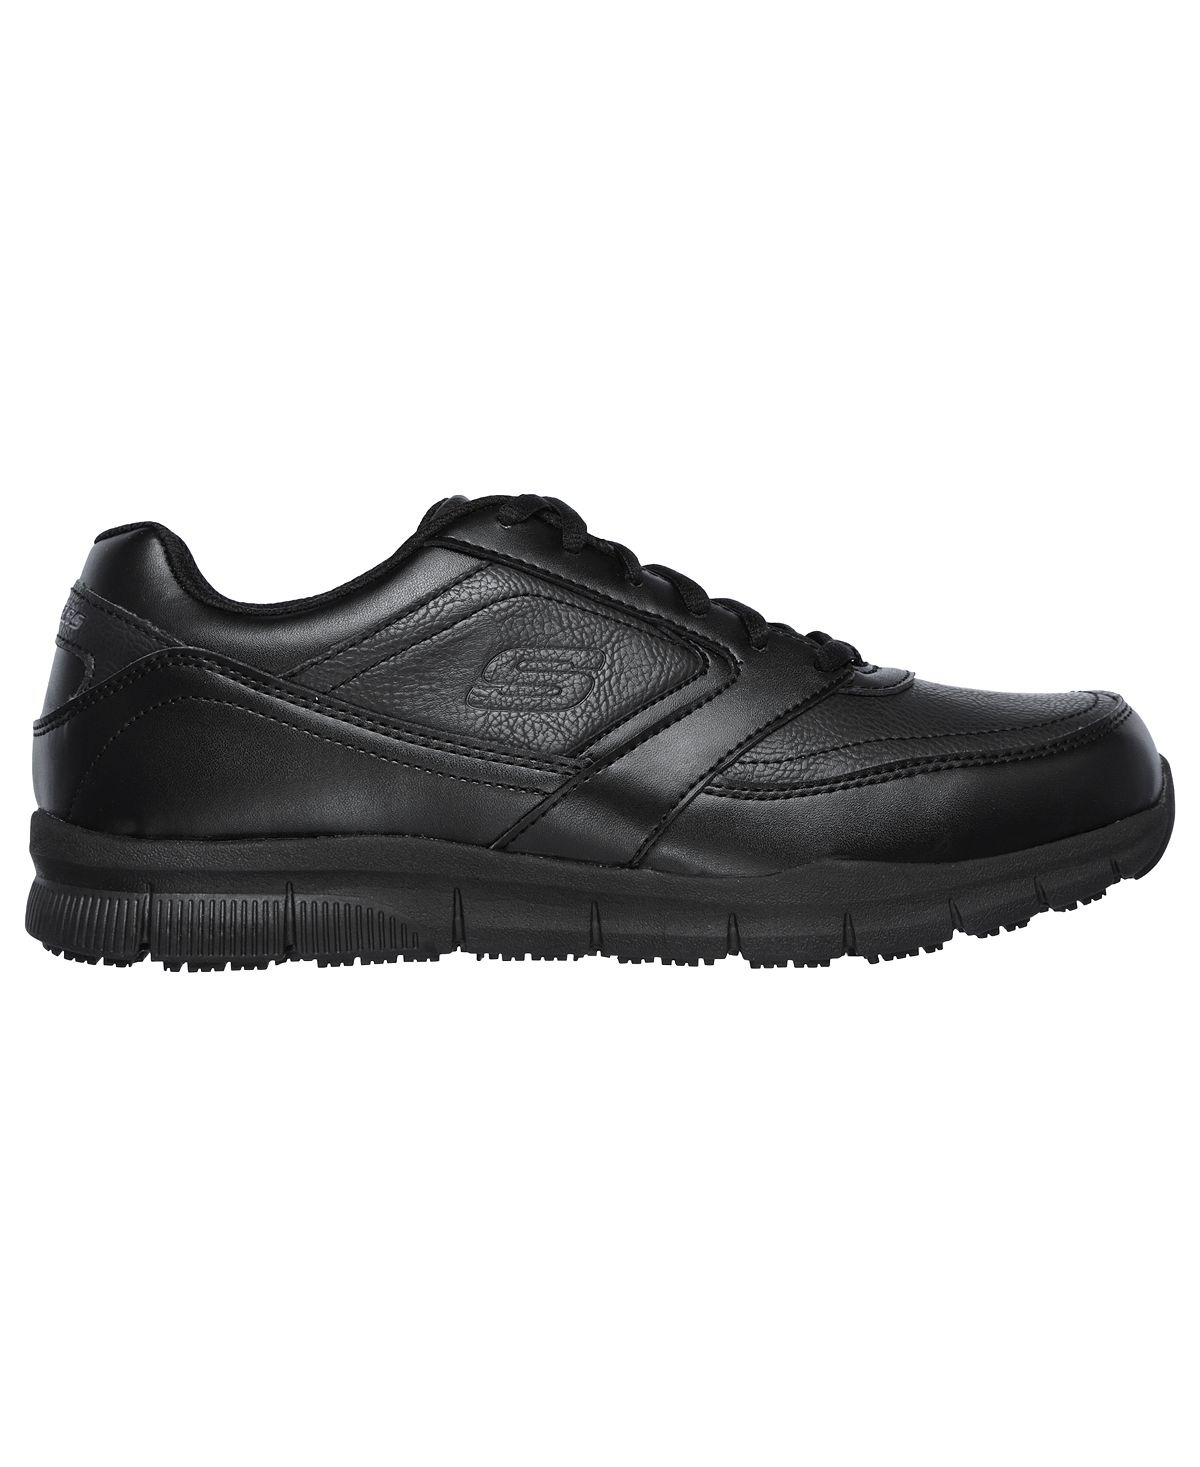 кроссовки skechers sport equalizer 3 0 sumnin relaxed fit black Кроссовки Skechers Men's Work Relaxed Fit Nampa Slip Resistant Work Casual From Finish Line, черный (Размер 39 RU)